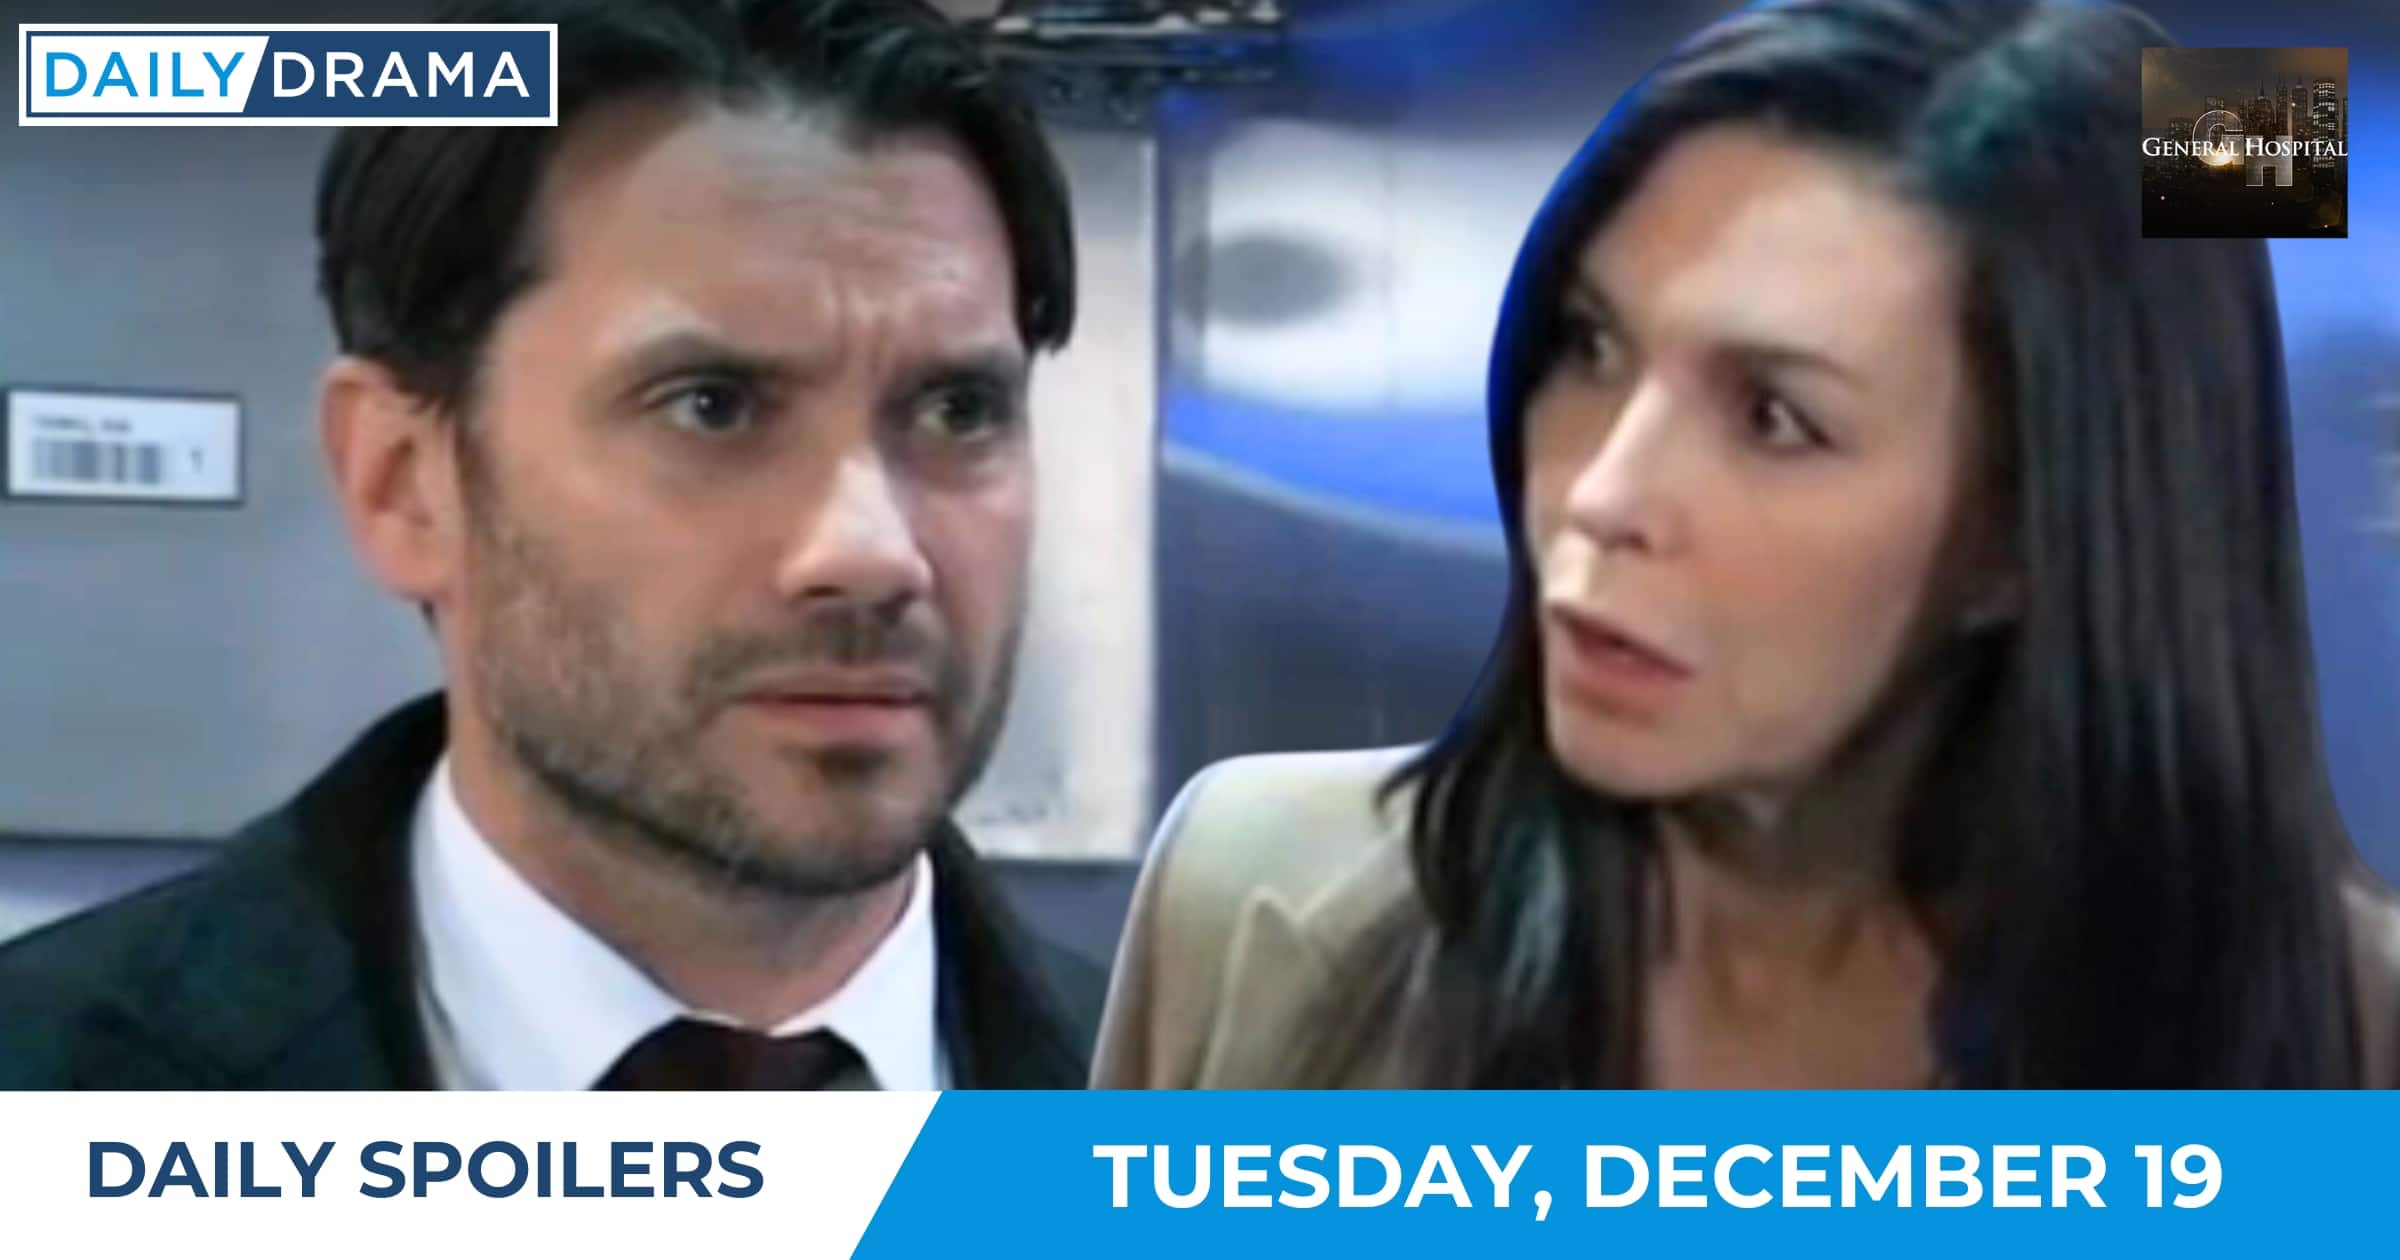 General Hospital Daily Spoilers - Dec 19 - Anna and Dante